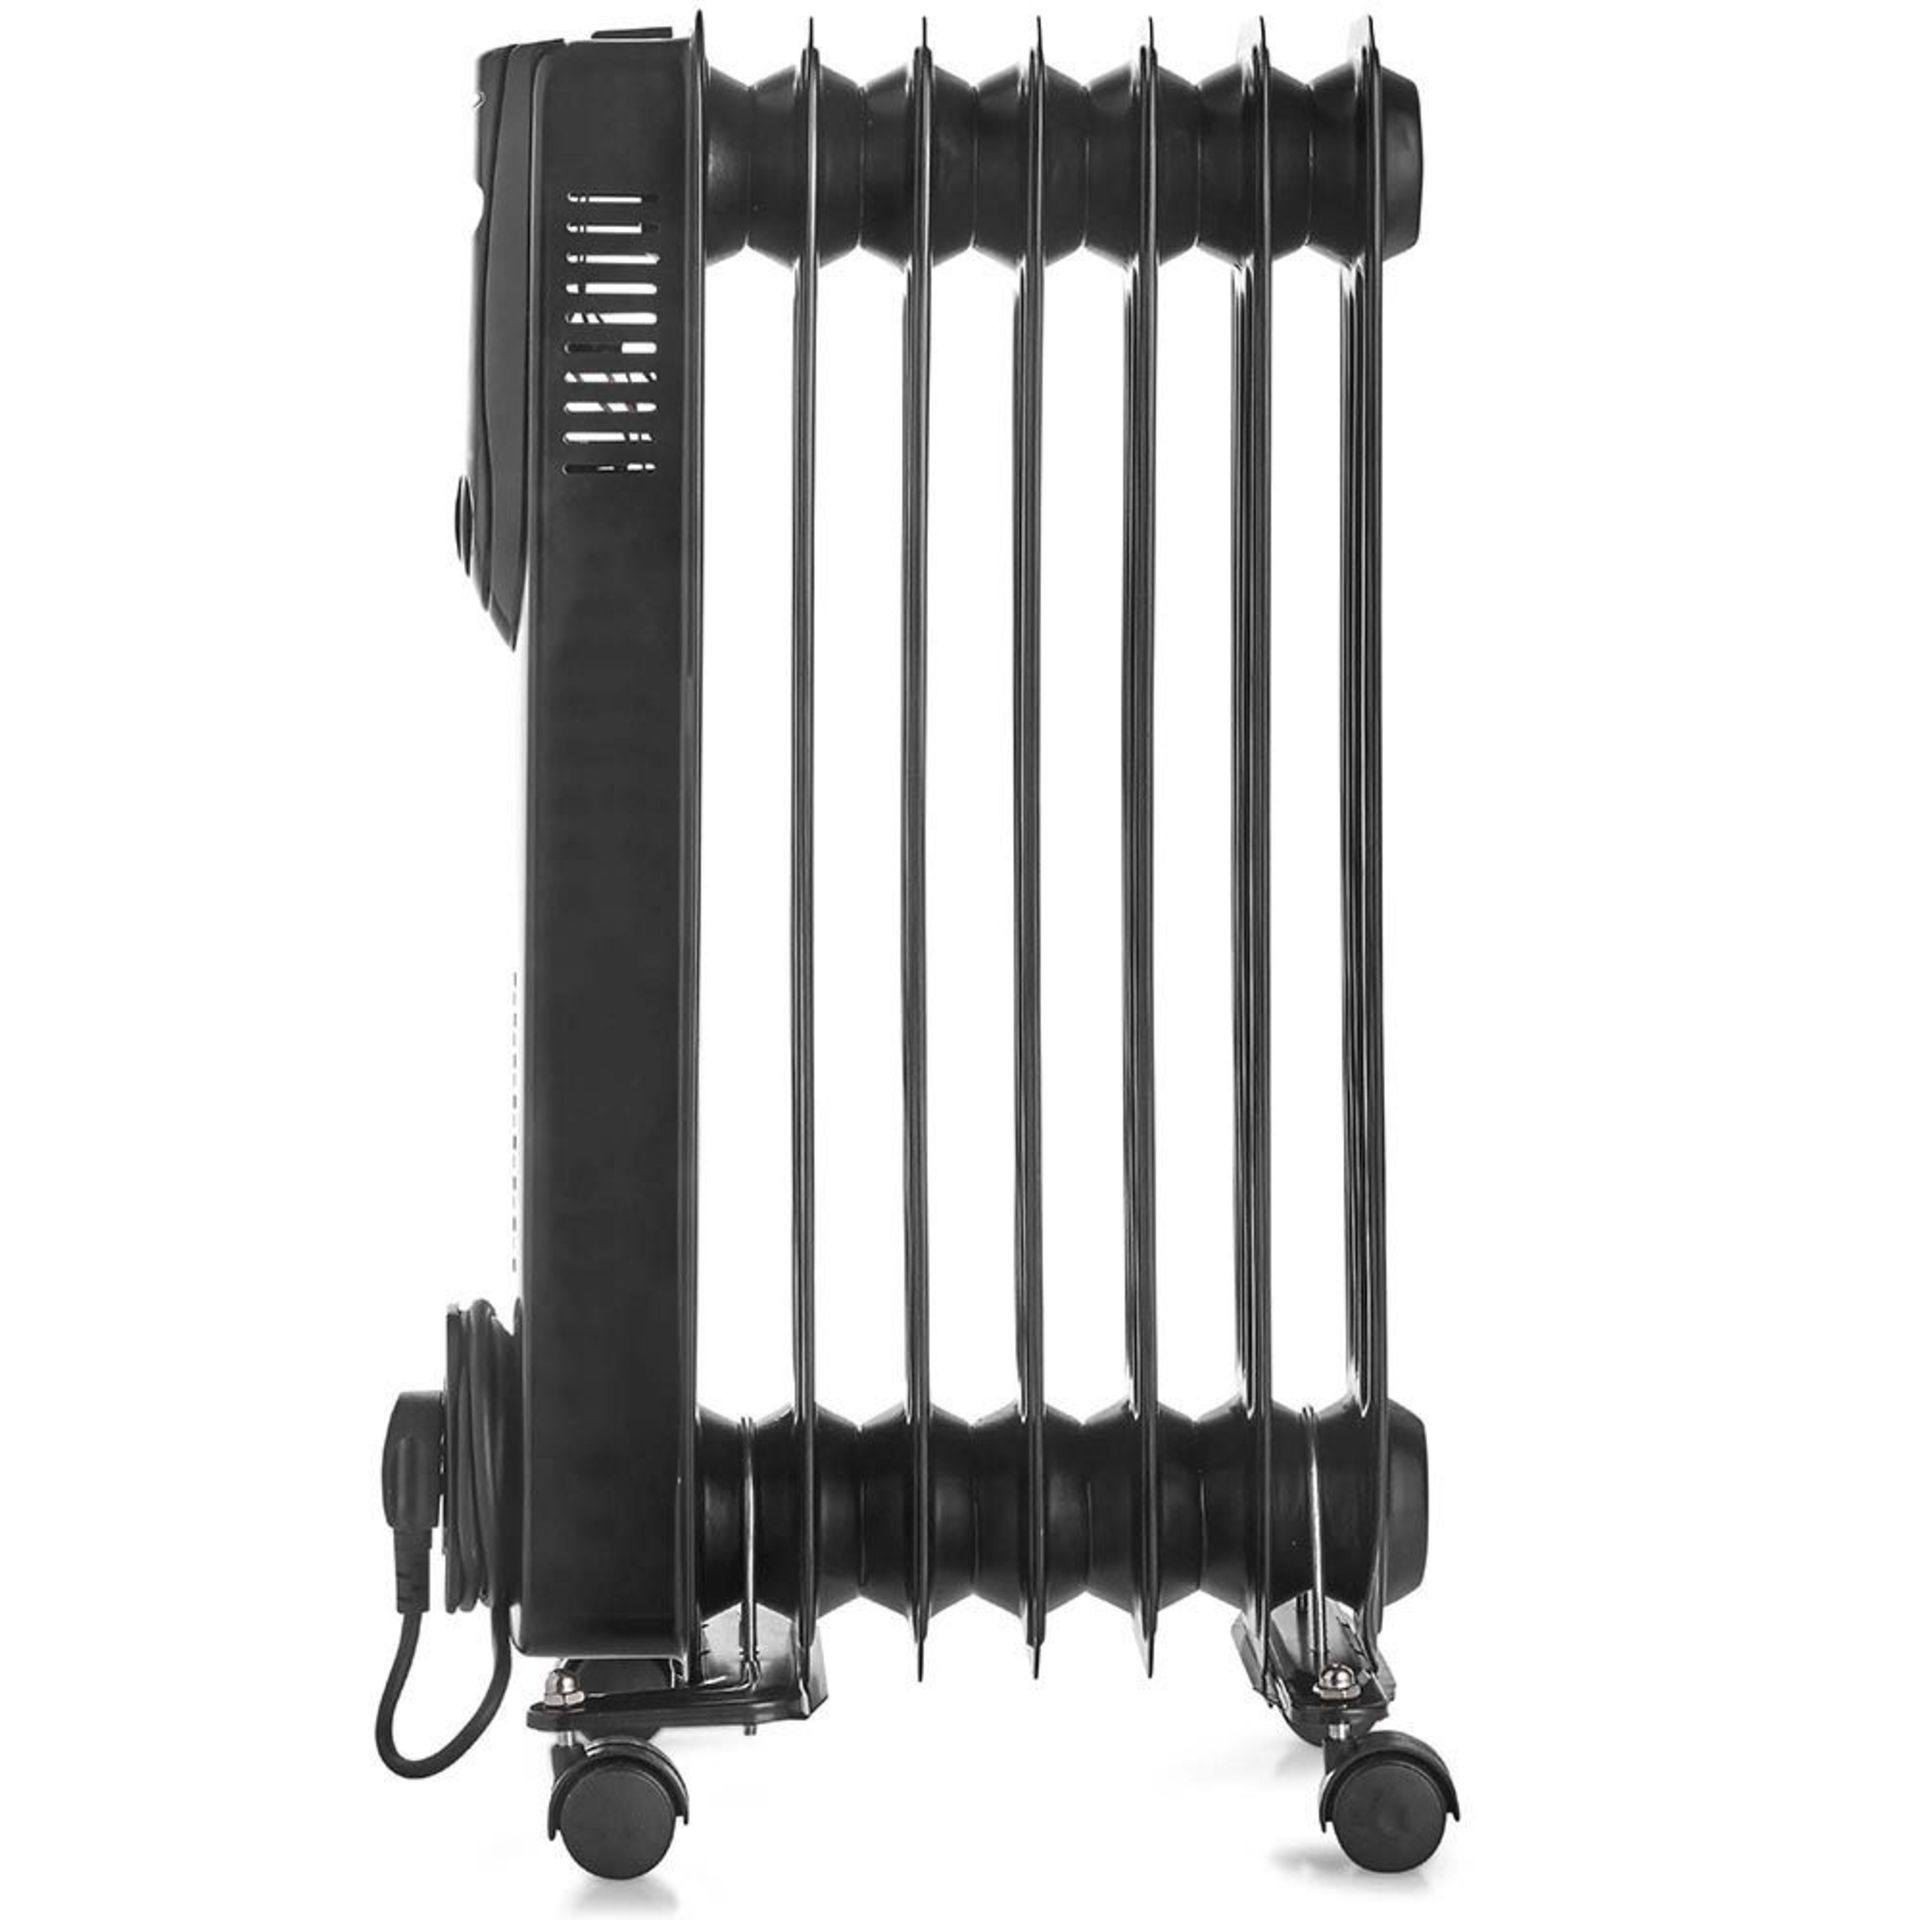 (DD71) 7 Fin 1500W Oil Filled Radiator - Black Powerful 1500W radiator with 7 oil-filled fins ... - Image 3 of 3